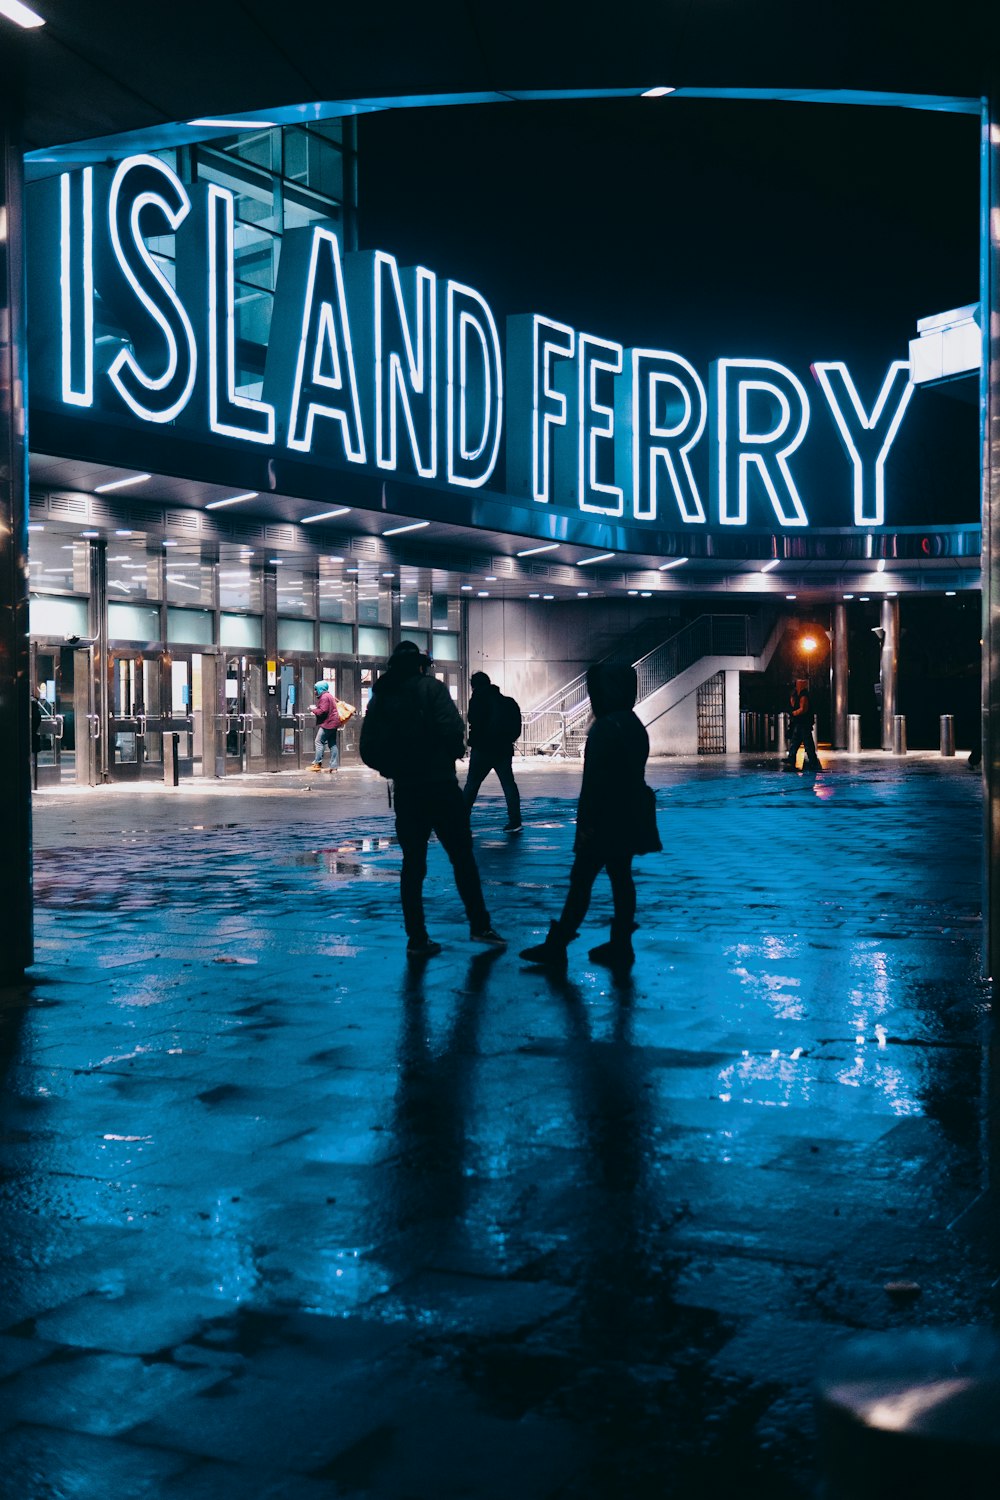 silhouette of three person standing near Island Ferry at night